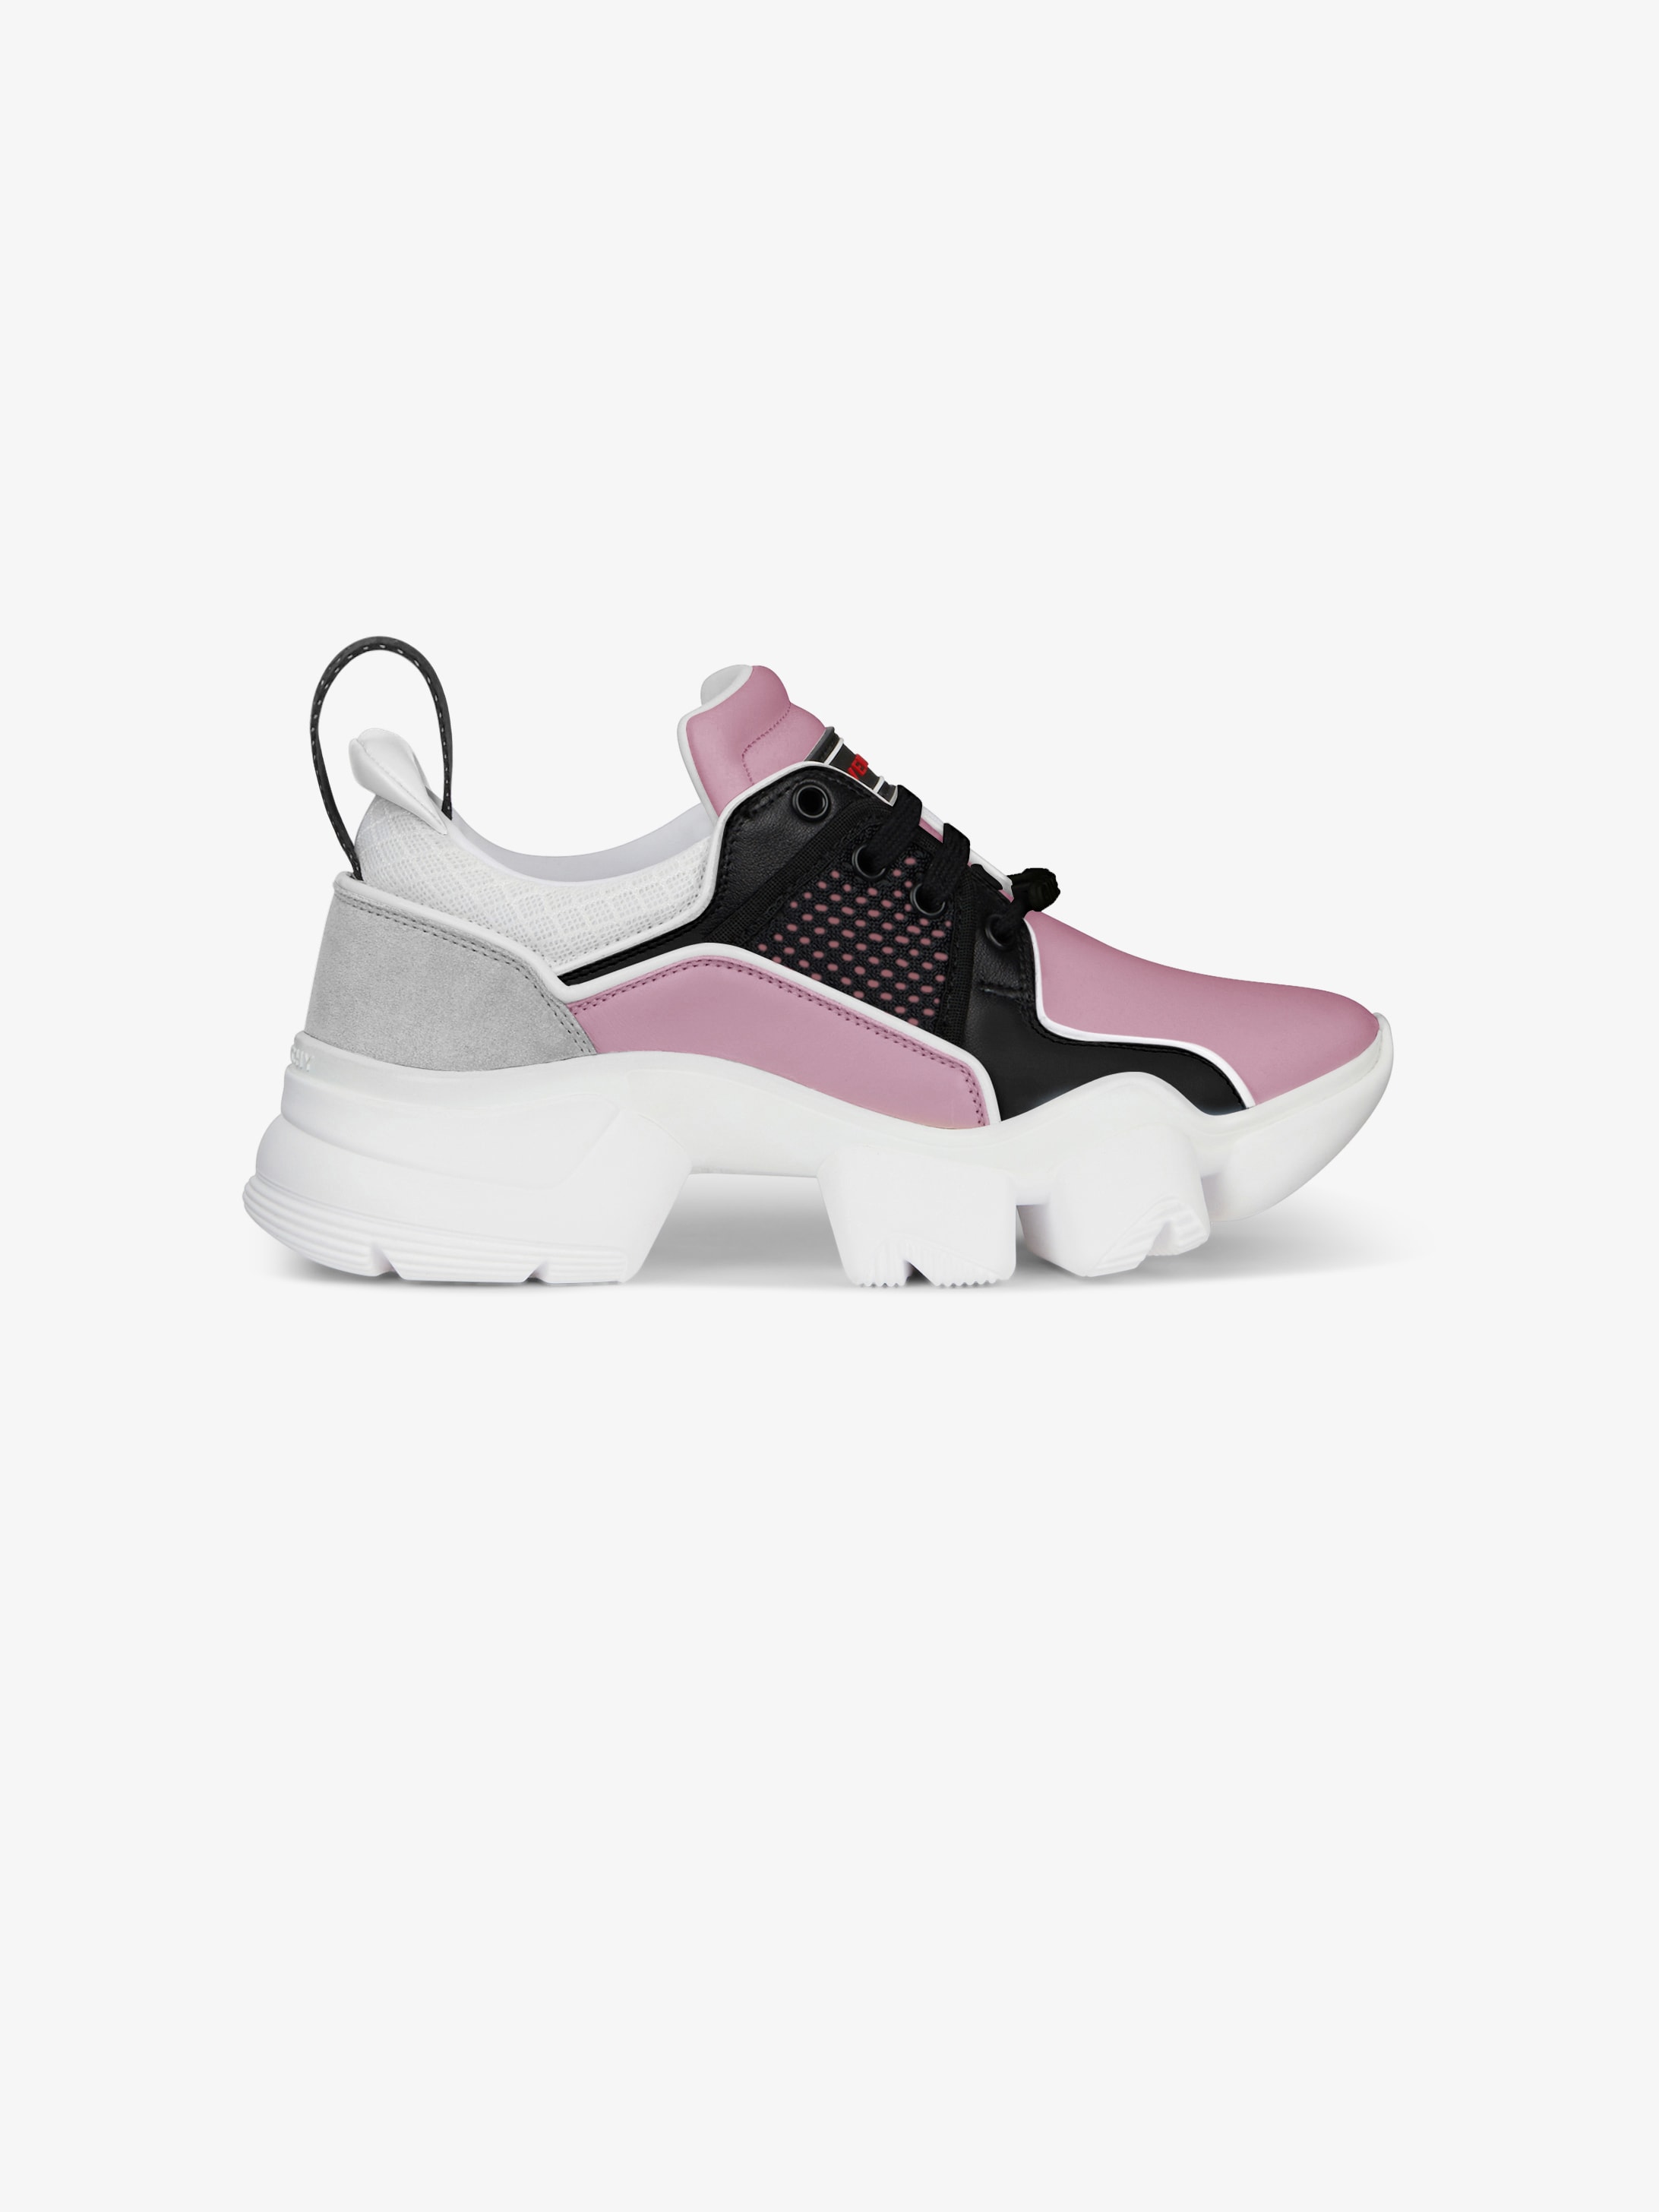 JAW low sneakers in neoprene and 